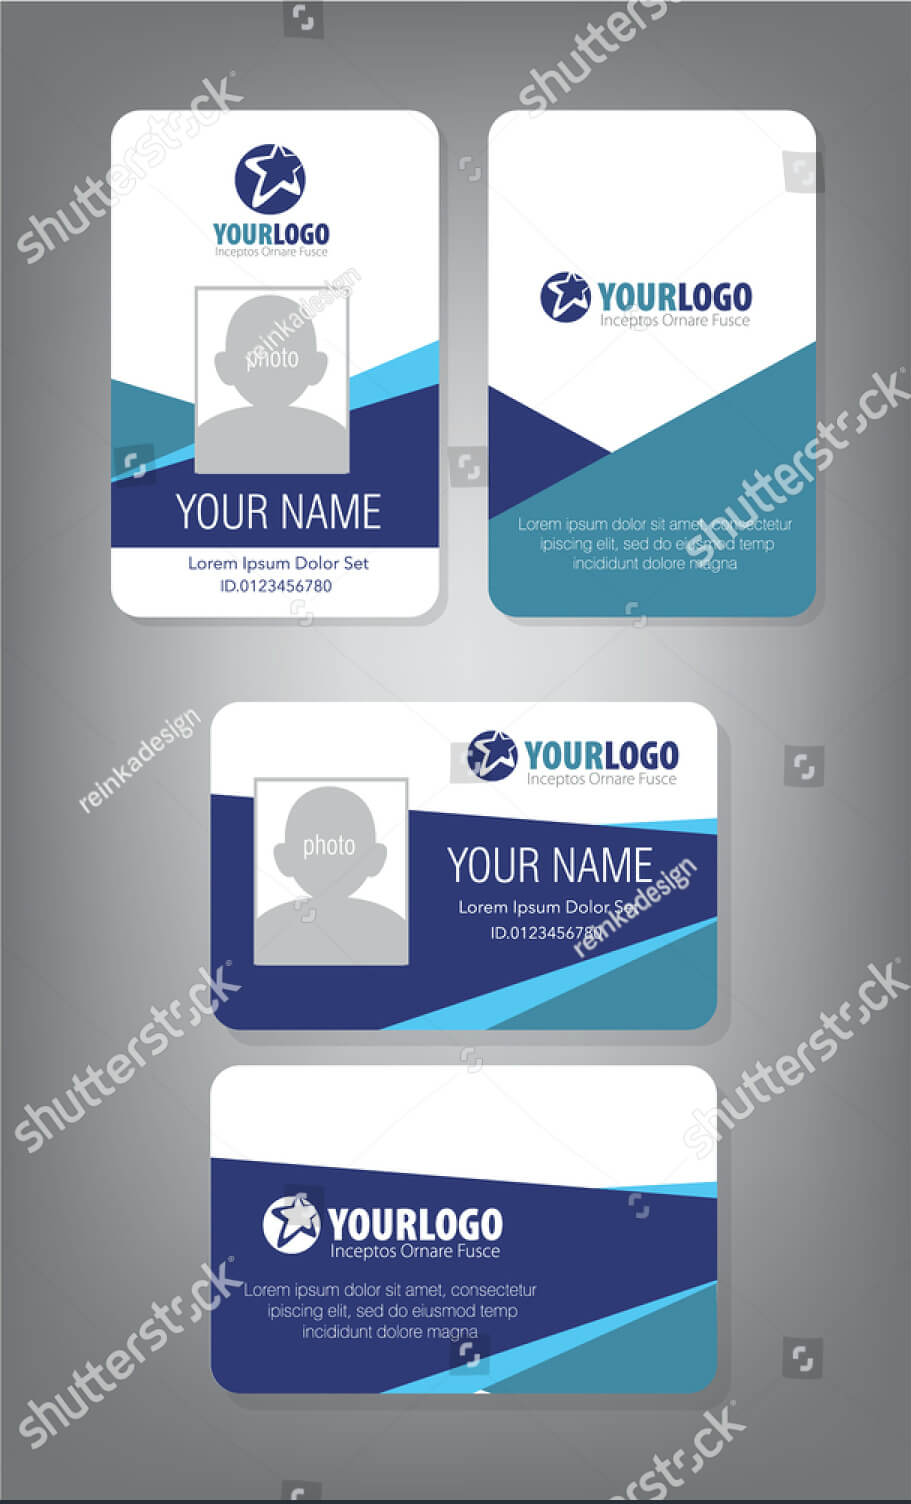 43+ Professional Id Card Designs – Psd, Eps, Ai, Word | Free With Regard To Id Card Design Template Psd Free Download